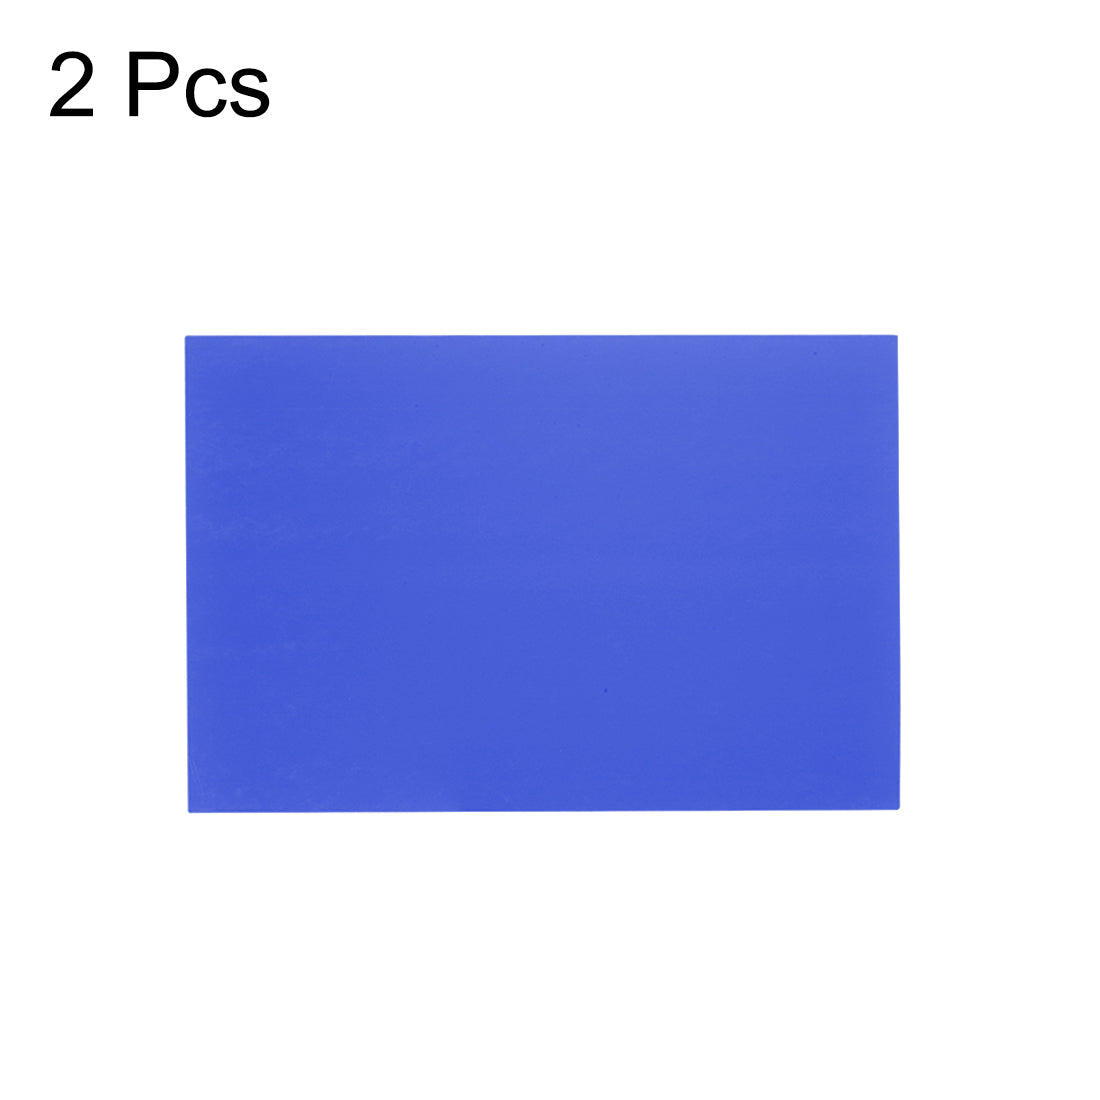 Uxcell Uxcell PVC Foam Board Sheet,3mm T x 8"W x 12“L,Blue,Double Sided,Expanded PVC Sheet,for	Presentations,Signboards,	Artsand	Crafts,Framing,Display,2pcs